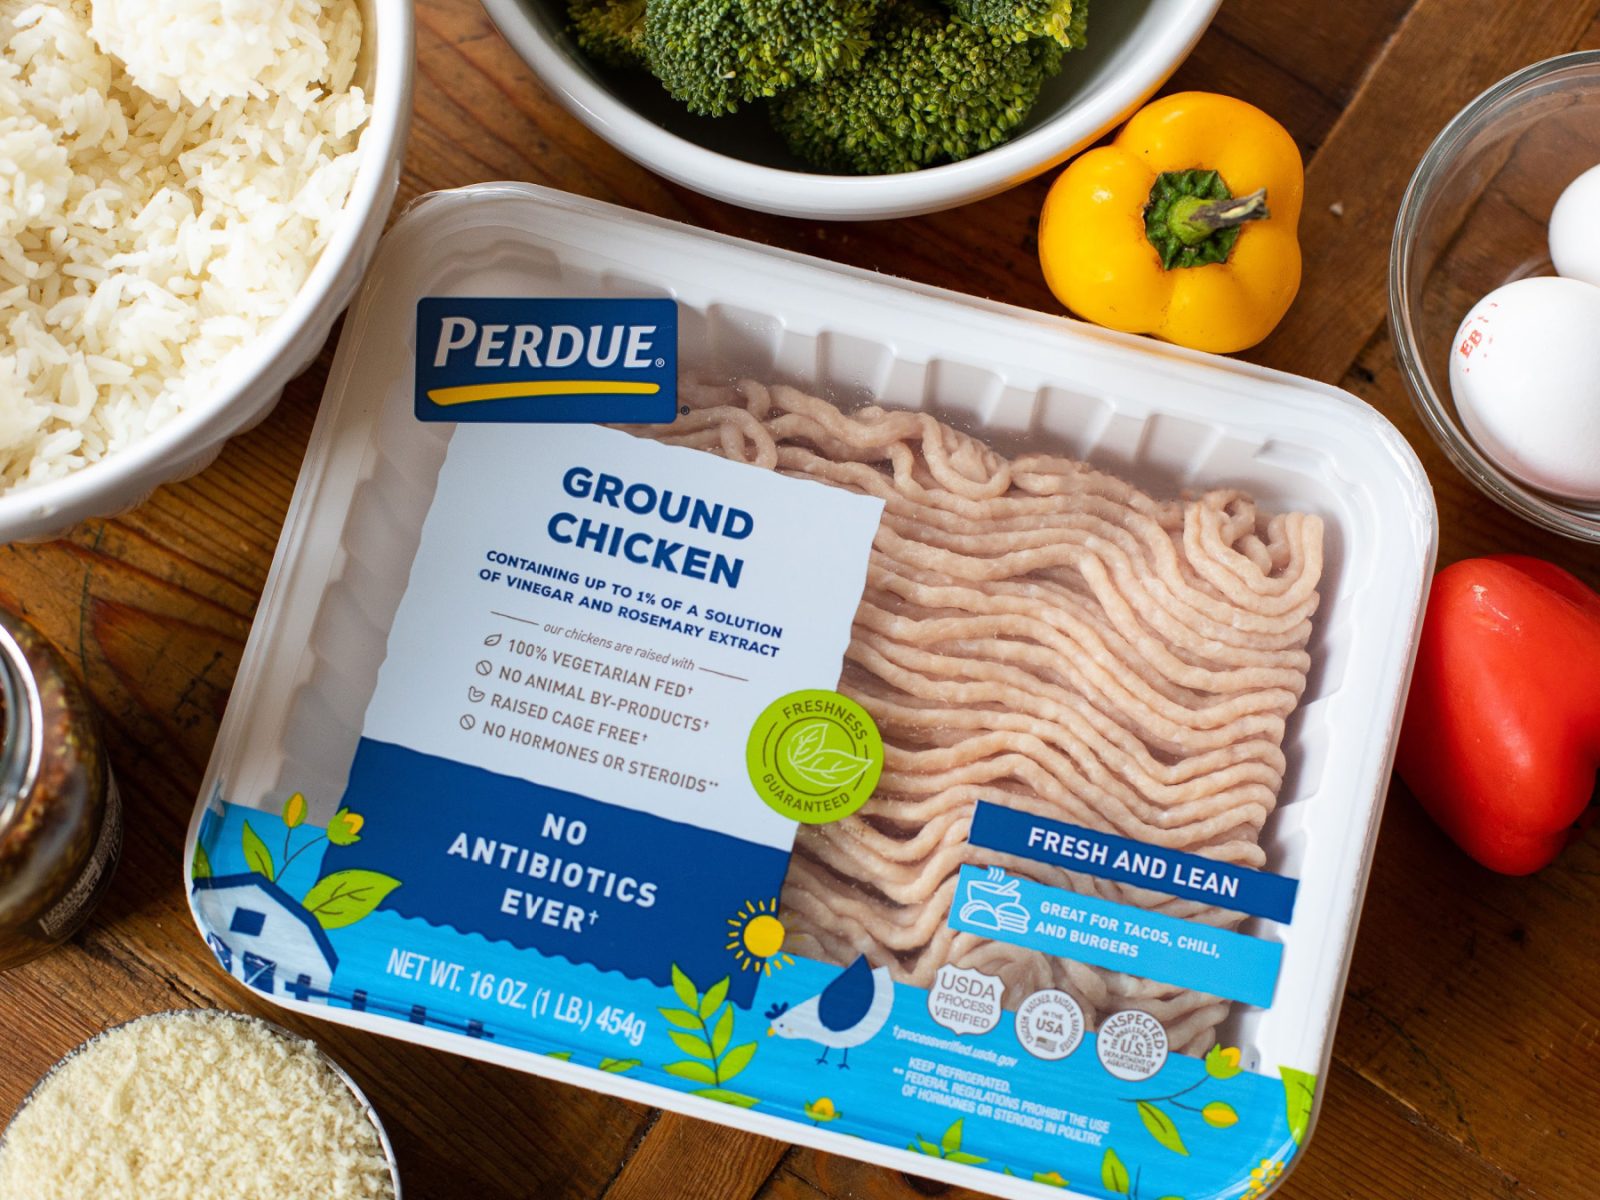 Get Perdue Ground Chicken For Just $3 Per Package At Publix